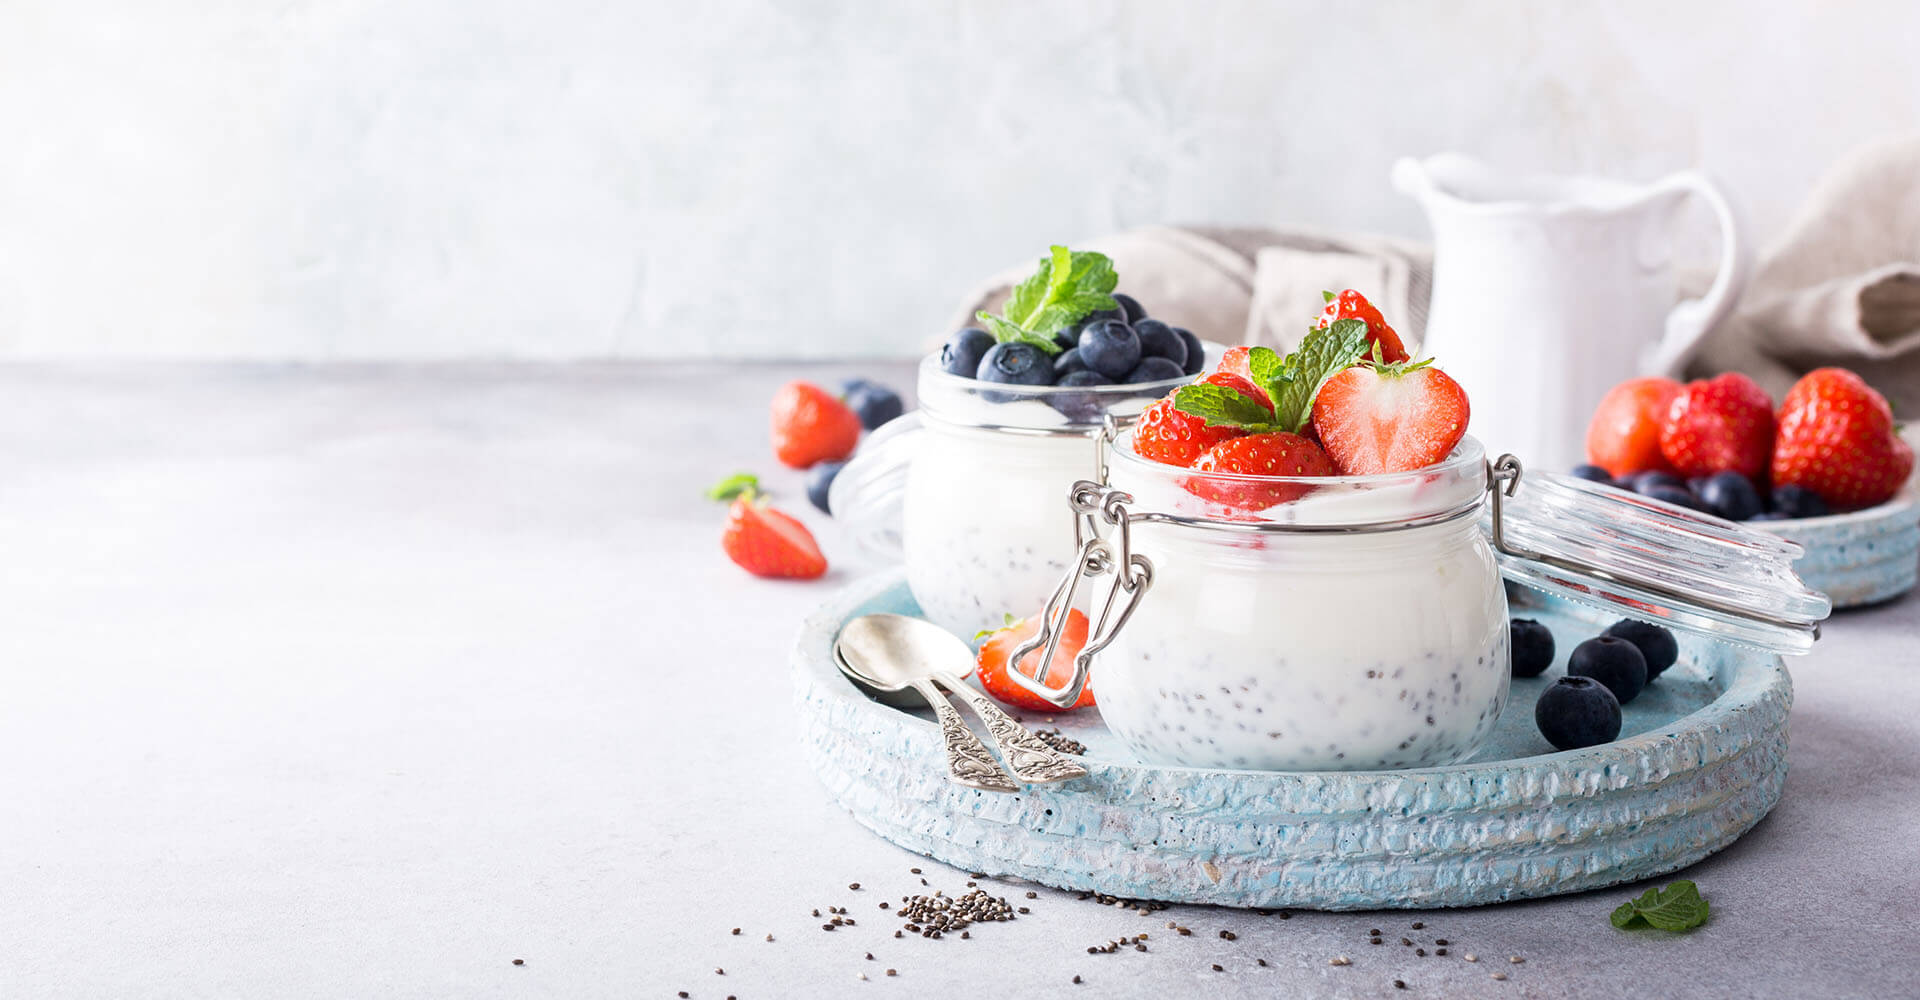 Different superfoods like berries, strawberries and chia seeds along with cottage cheese